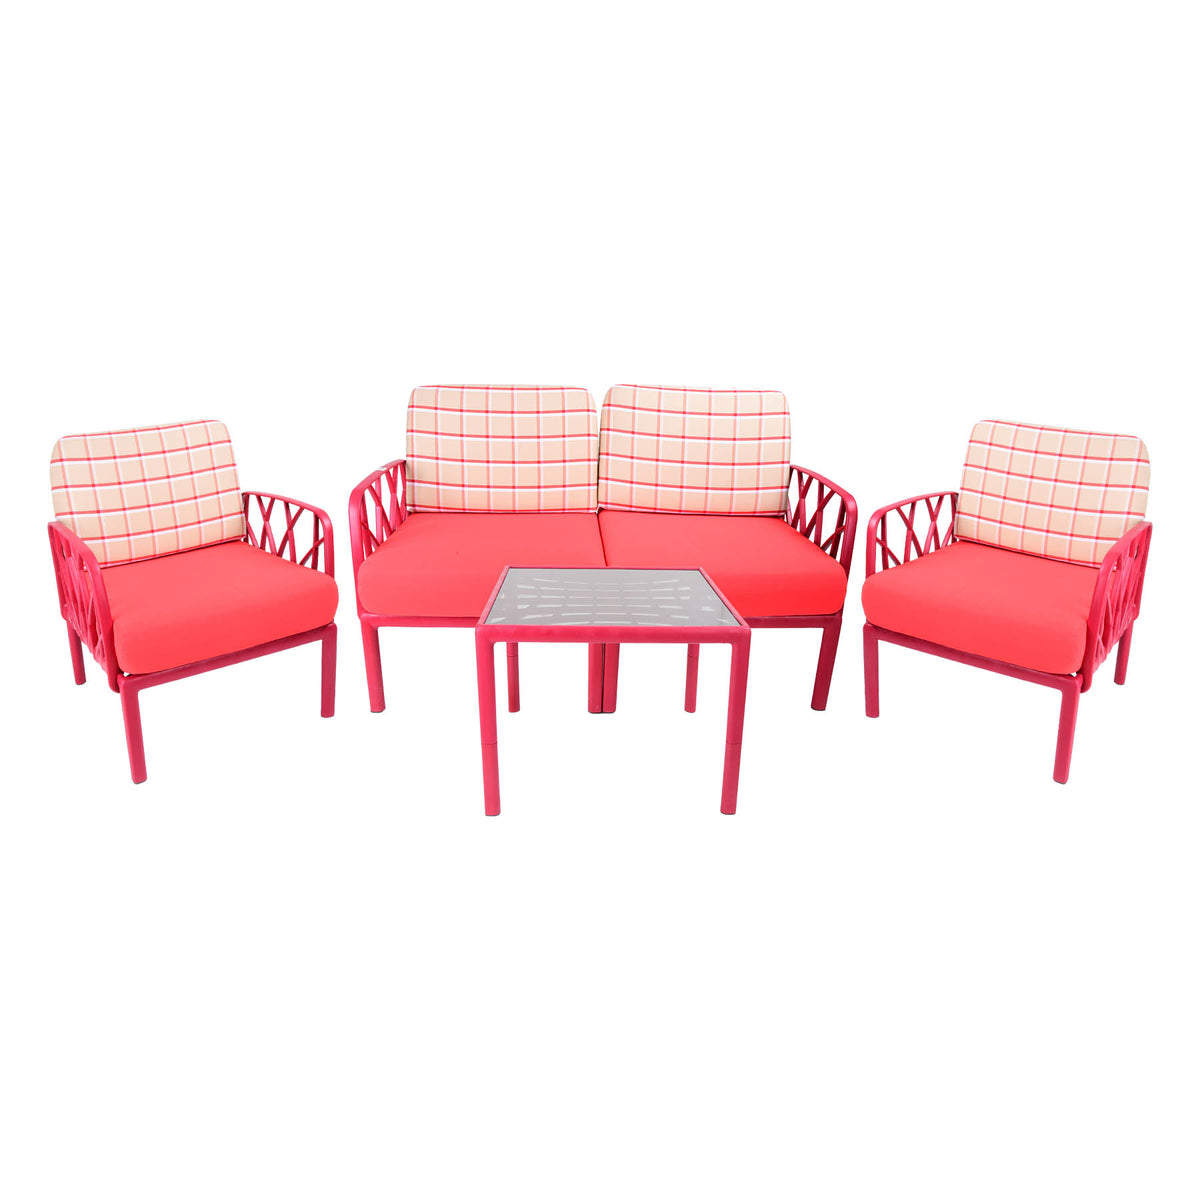 4 Pieces garden sofa set with table - Red